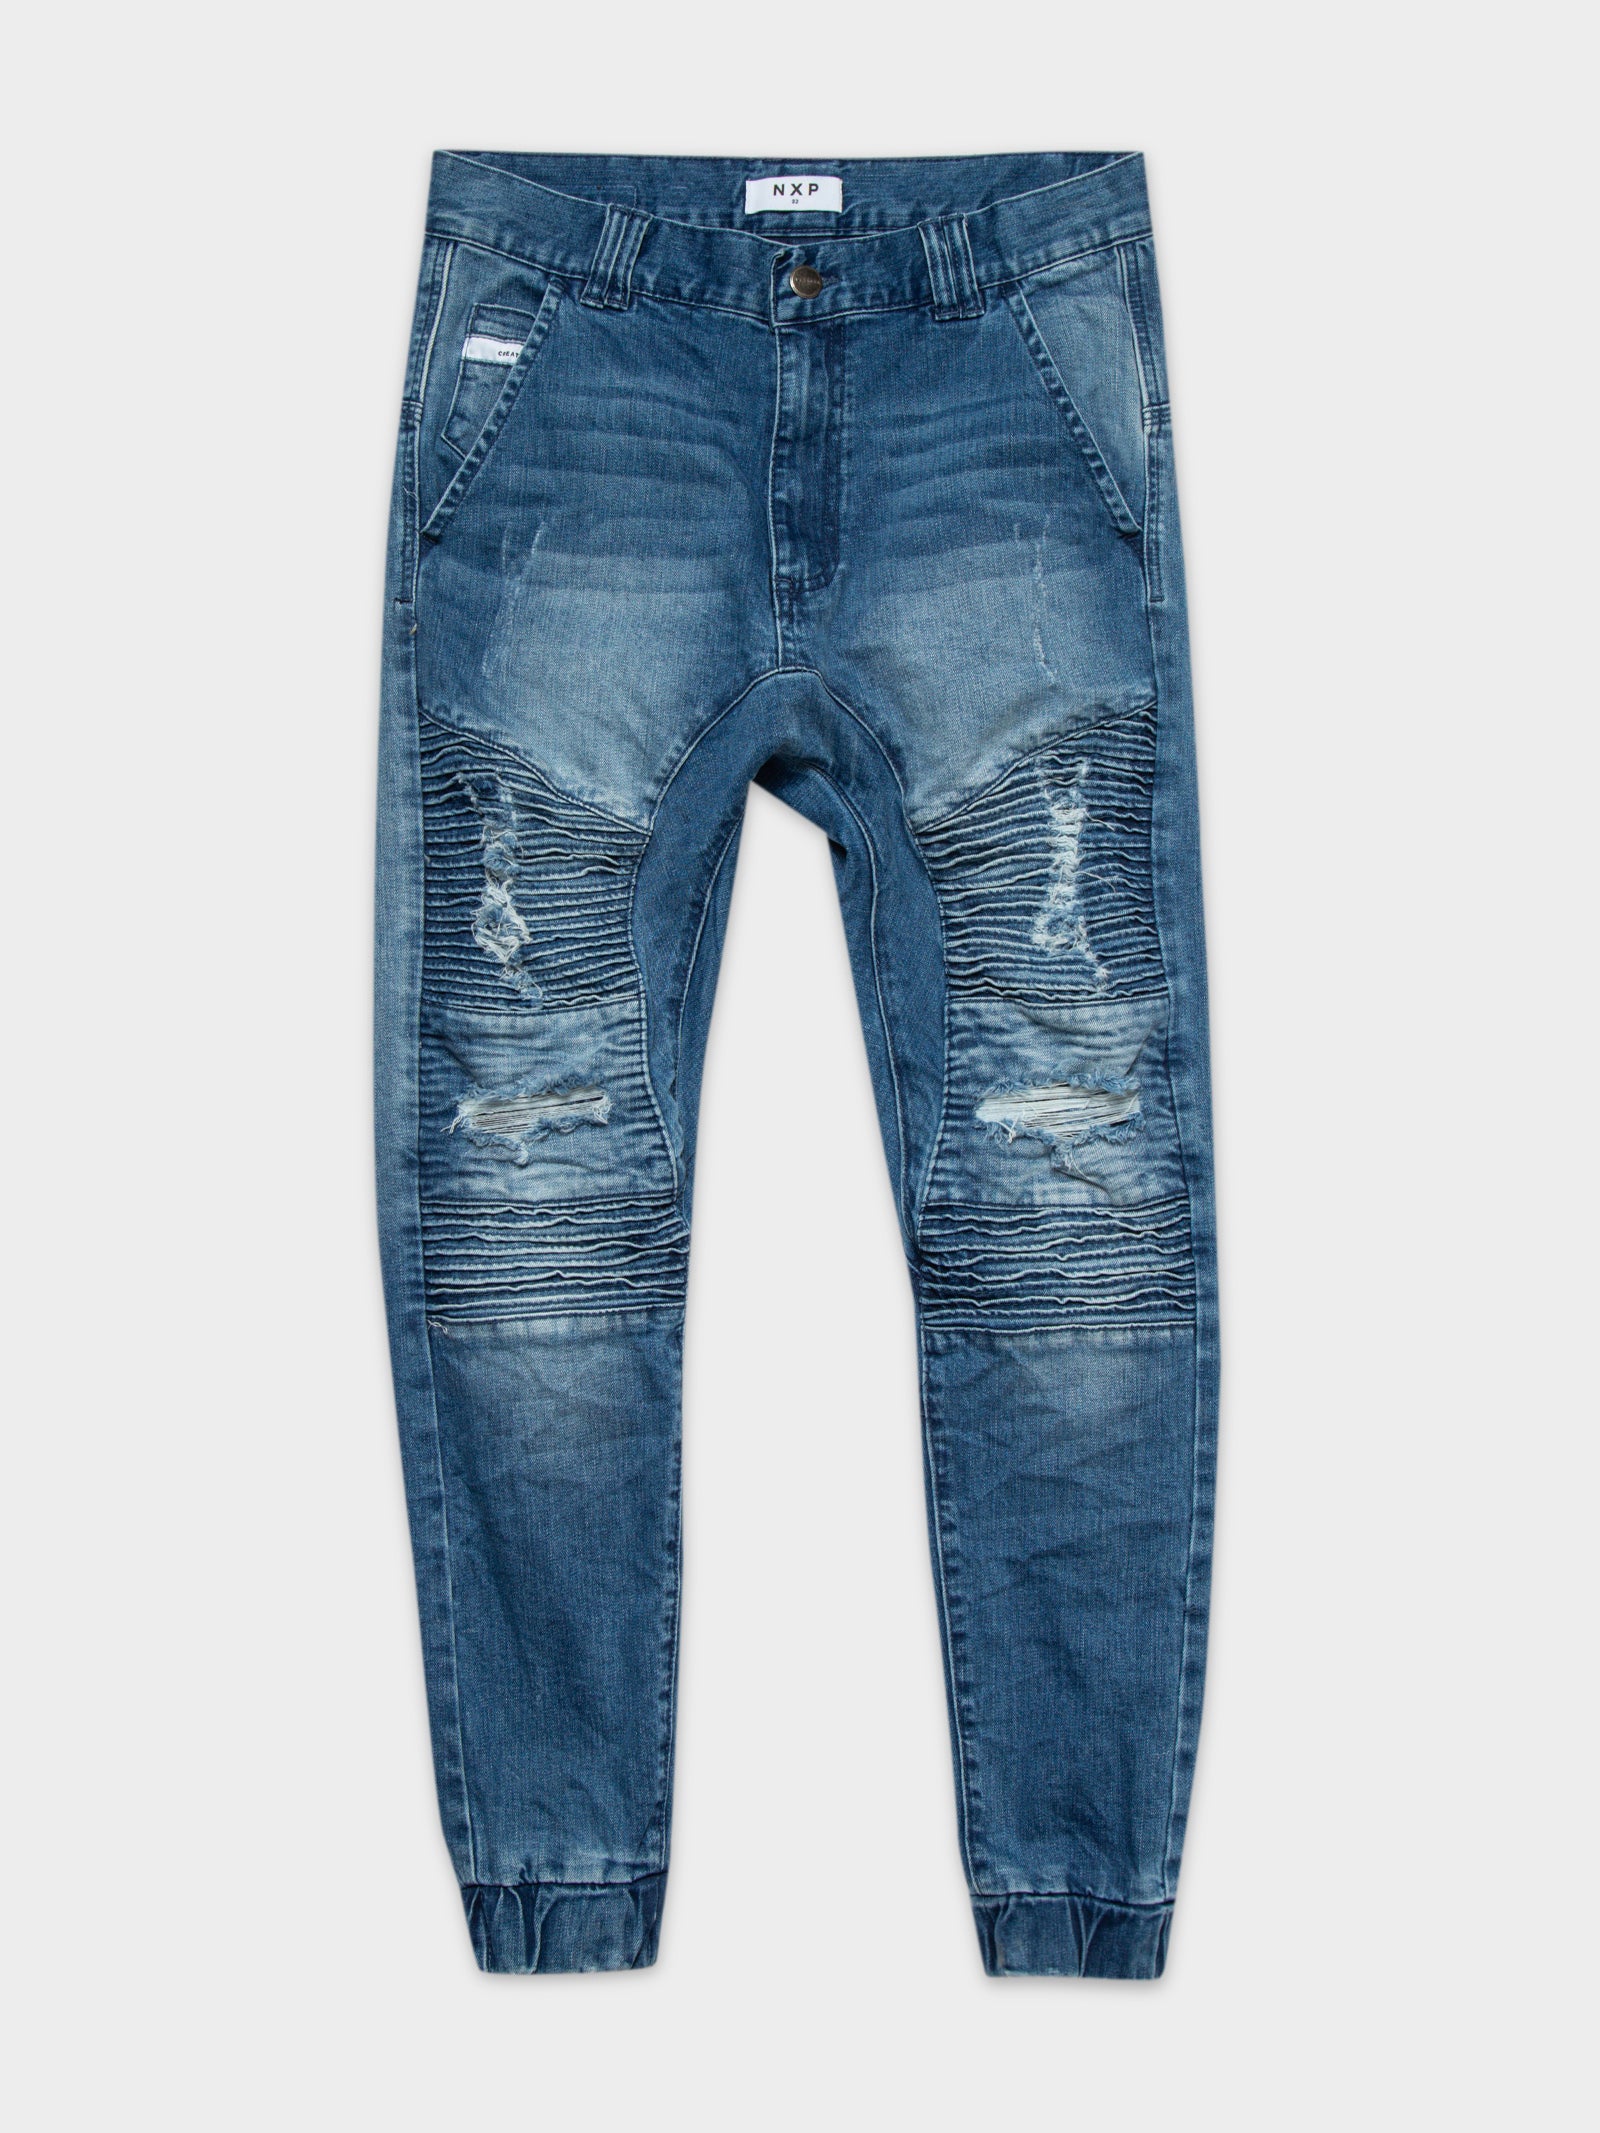 Hellcat Tight Tapered Jeans in Kentucky Blue Denim - Glue Store